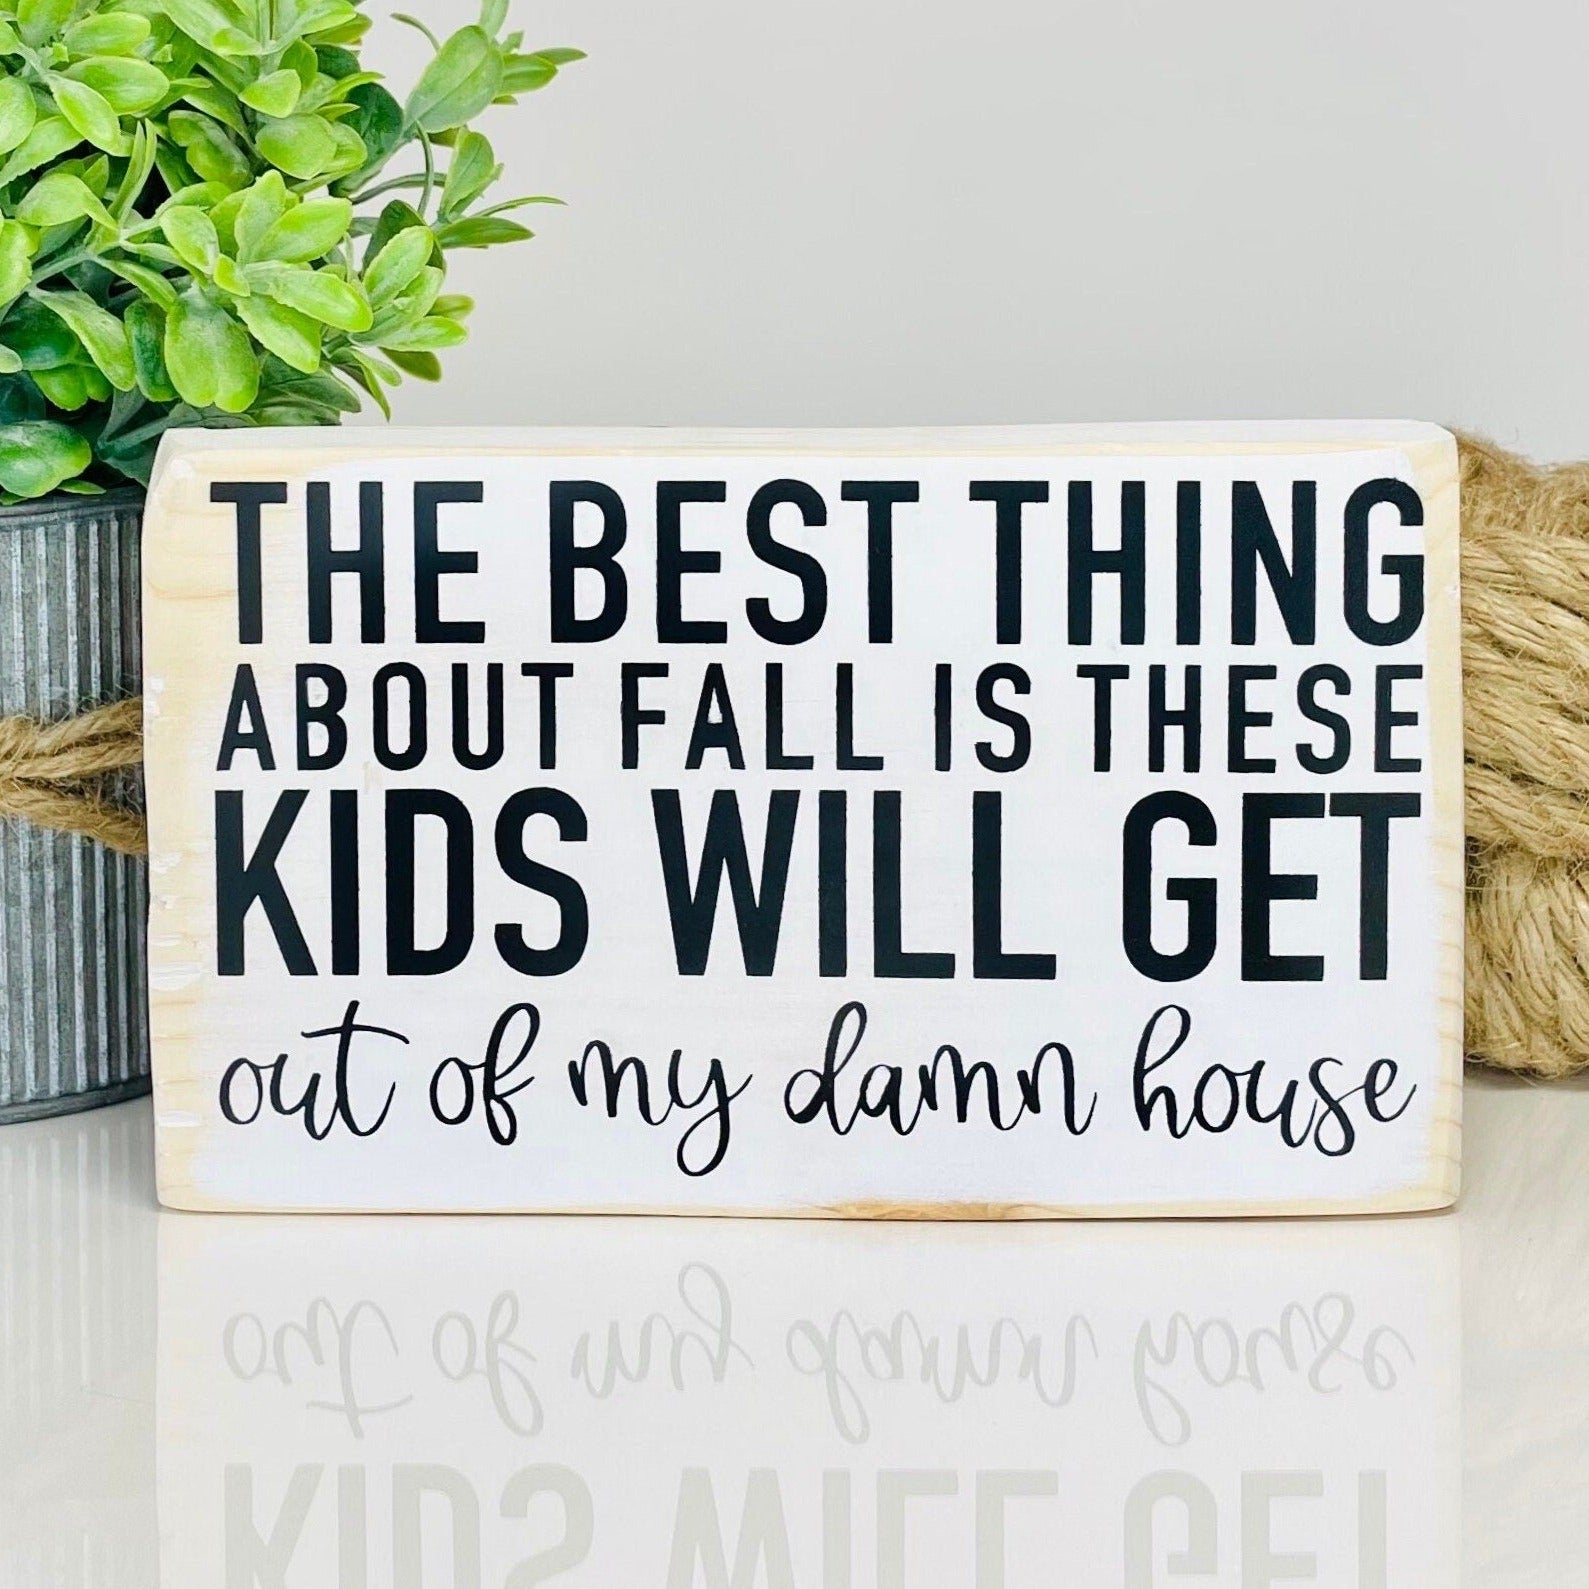 white rectangular small wood sign with black lettering that says "the best thing about fall is these kids will get out of my damn house". All words are in all caps except for "out of my damn house" which is in a script font